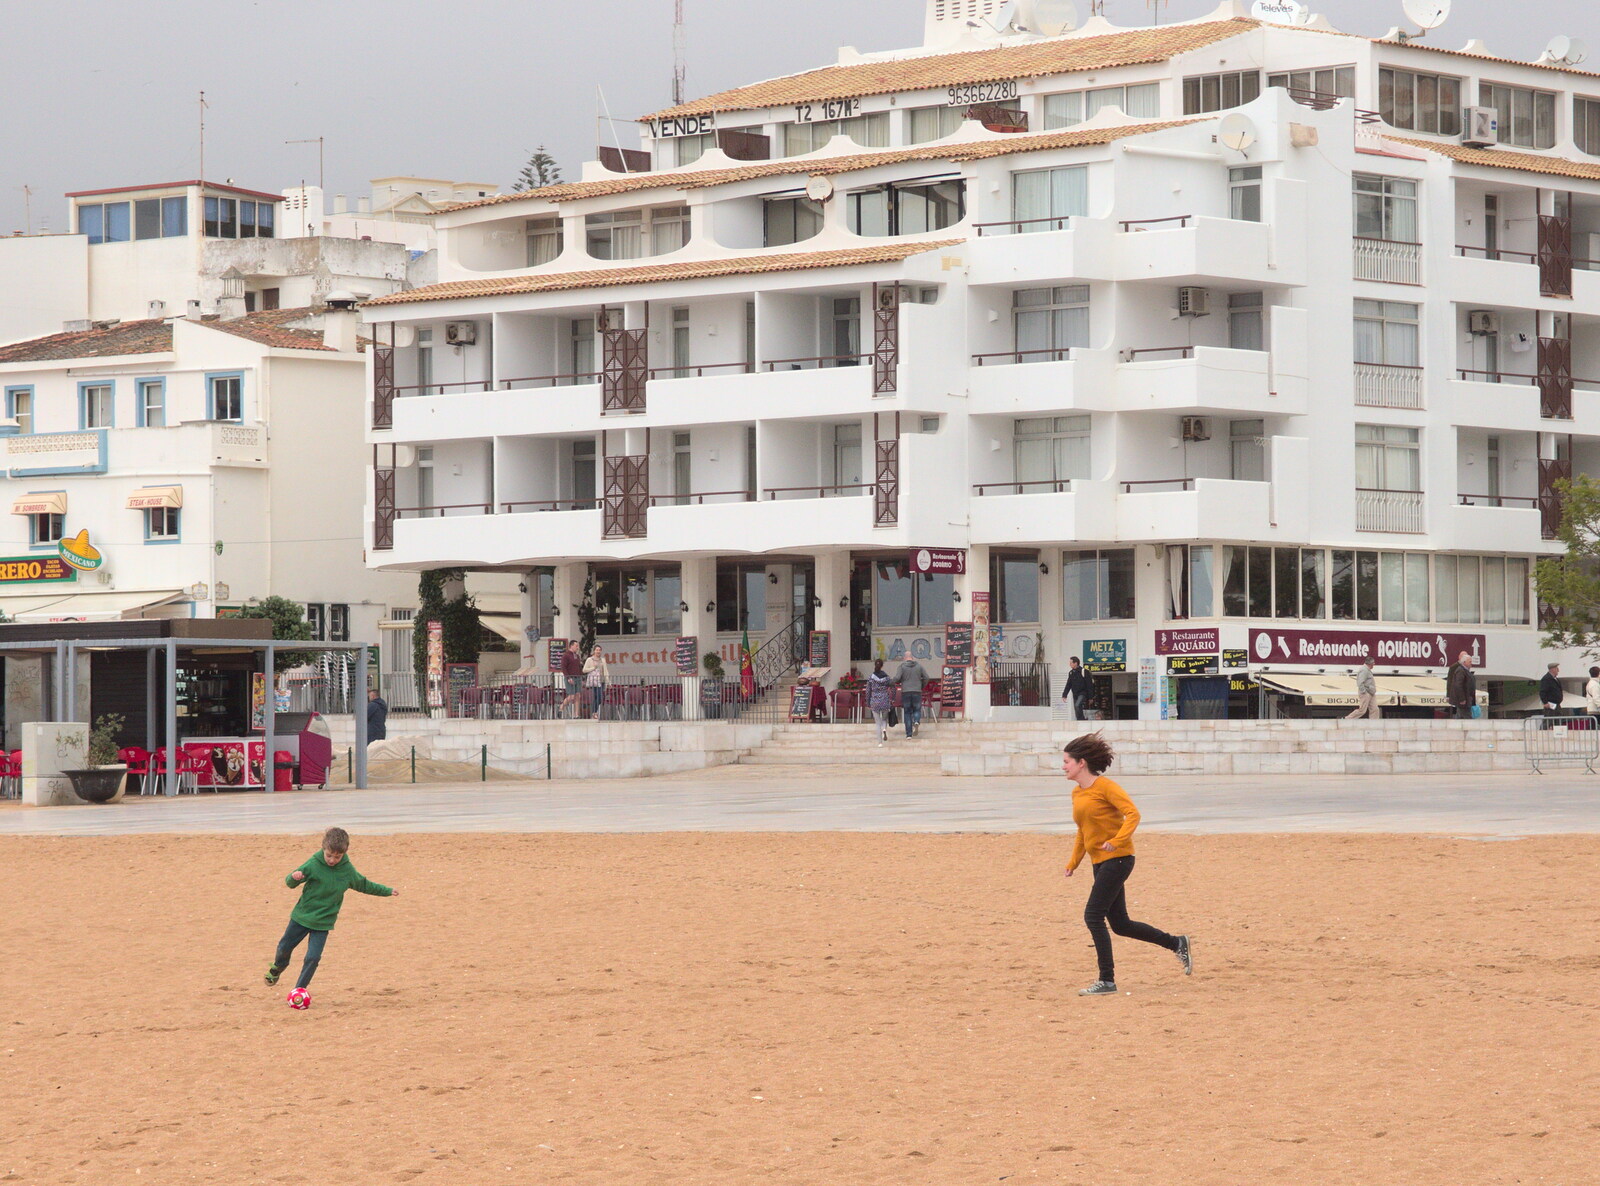 More football action, as Isobel's hair goes flying from A Trip to Albufeira: The Hotel Paraiso, Portugal - 3rd April 2016